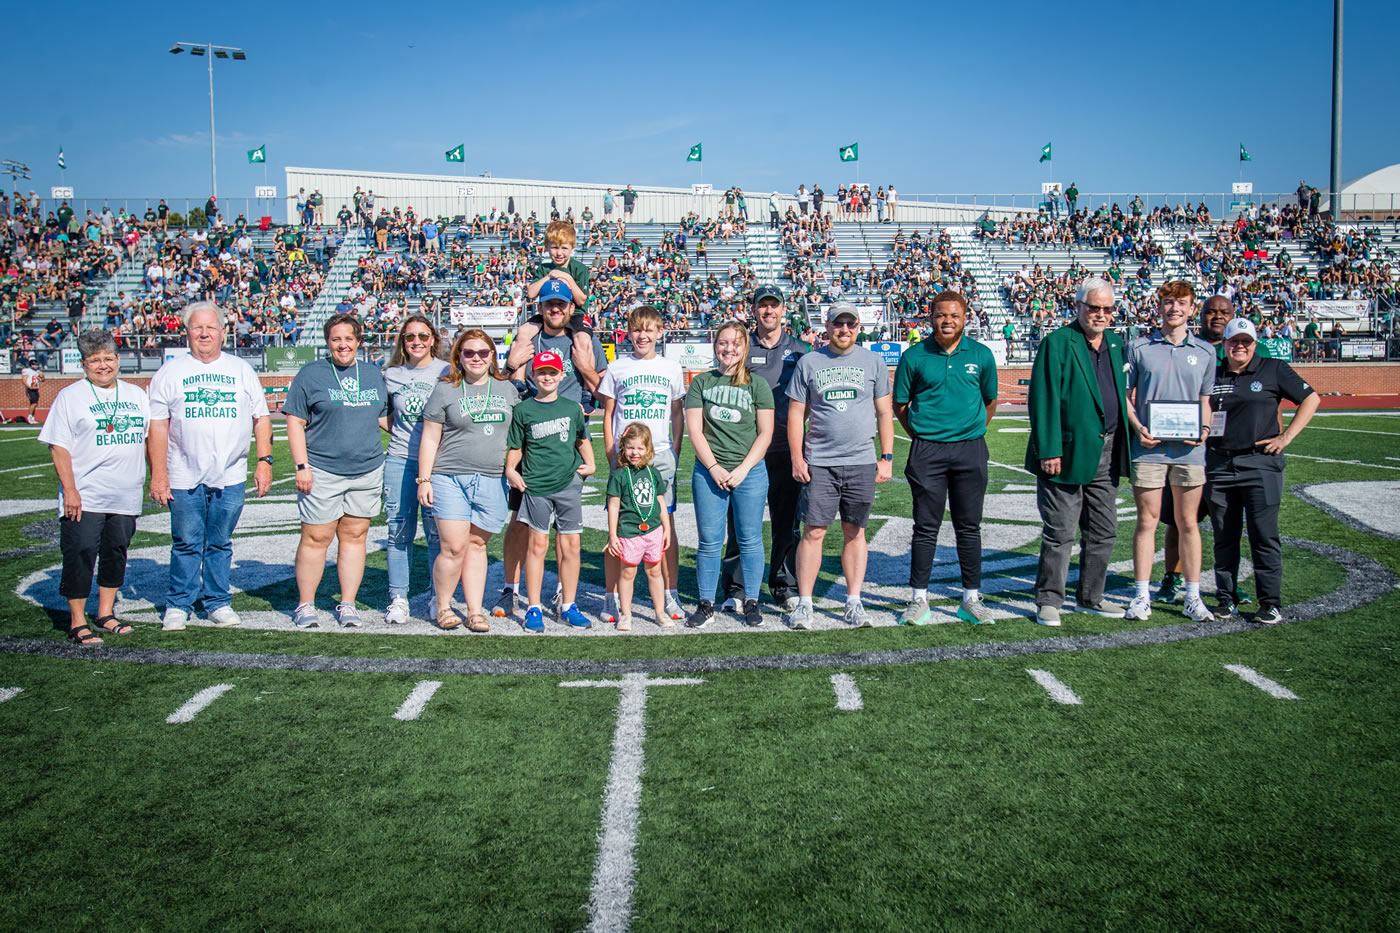 The Swink family was honored during Saturday’s Bearcat football game as the Northwest Family of the Year. Left to right are Sherry Swink; Arnold Swink; Jennifer Swink; Abby Swink; Kara Petrovic; John Petrovic, holding Charlie and with Jack standing in front of him; Aiden Petrovic with Lucy Petrovic standing in front of him; Anna Swink; Director of Alumni Relations Duane Havard; Brian Swink; Student Senate Executive Vice President Dami Popoola; Northwest President Emeritus Dr. Dean Hubbard; Henry Swink; Northwest Interim President Dr. Clarence Green; and Interim Director of Campus Dining Sara Tompkins.